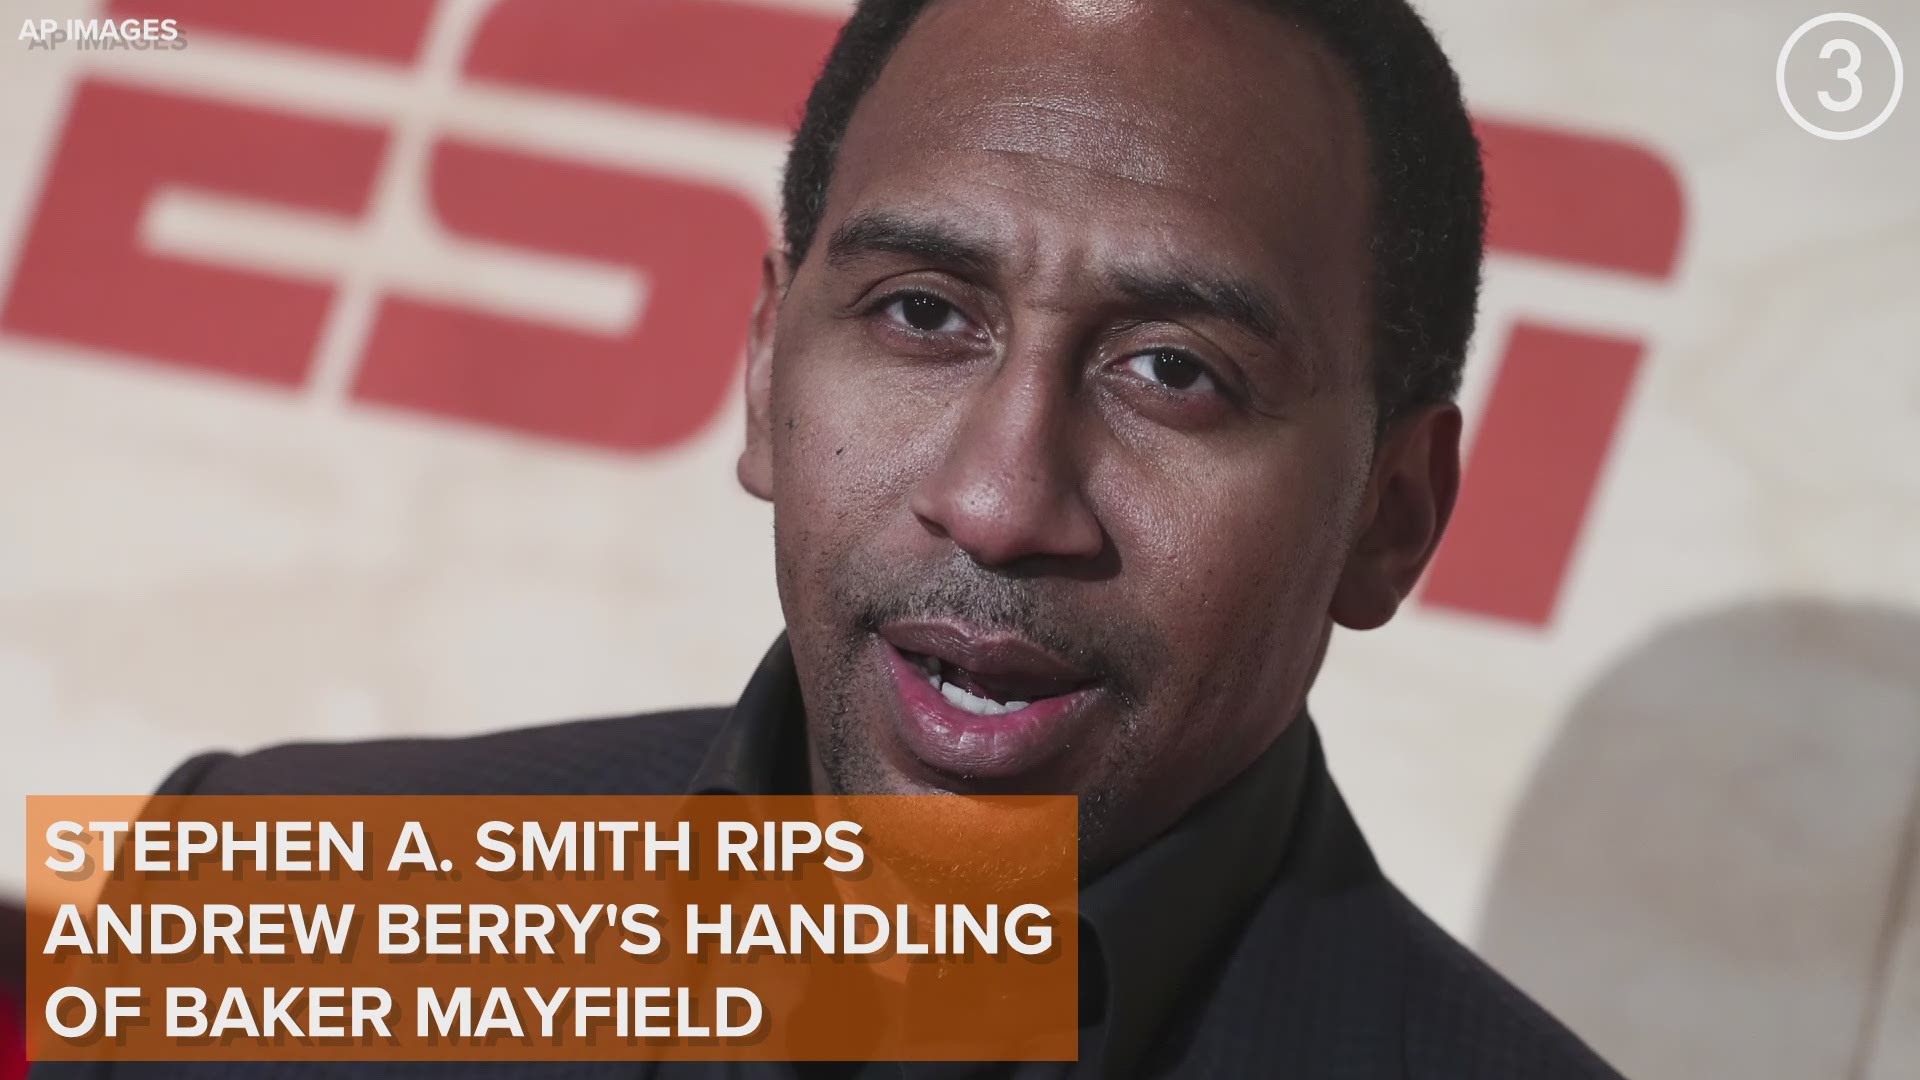 ESPN's Stephen A. Smith has taken issue with Cleveland Browns general manager Andrew Berry's support of Baker Mayfield. "You gotta produce, period. Show up."